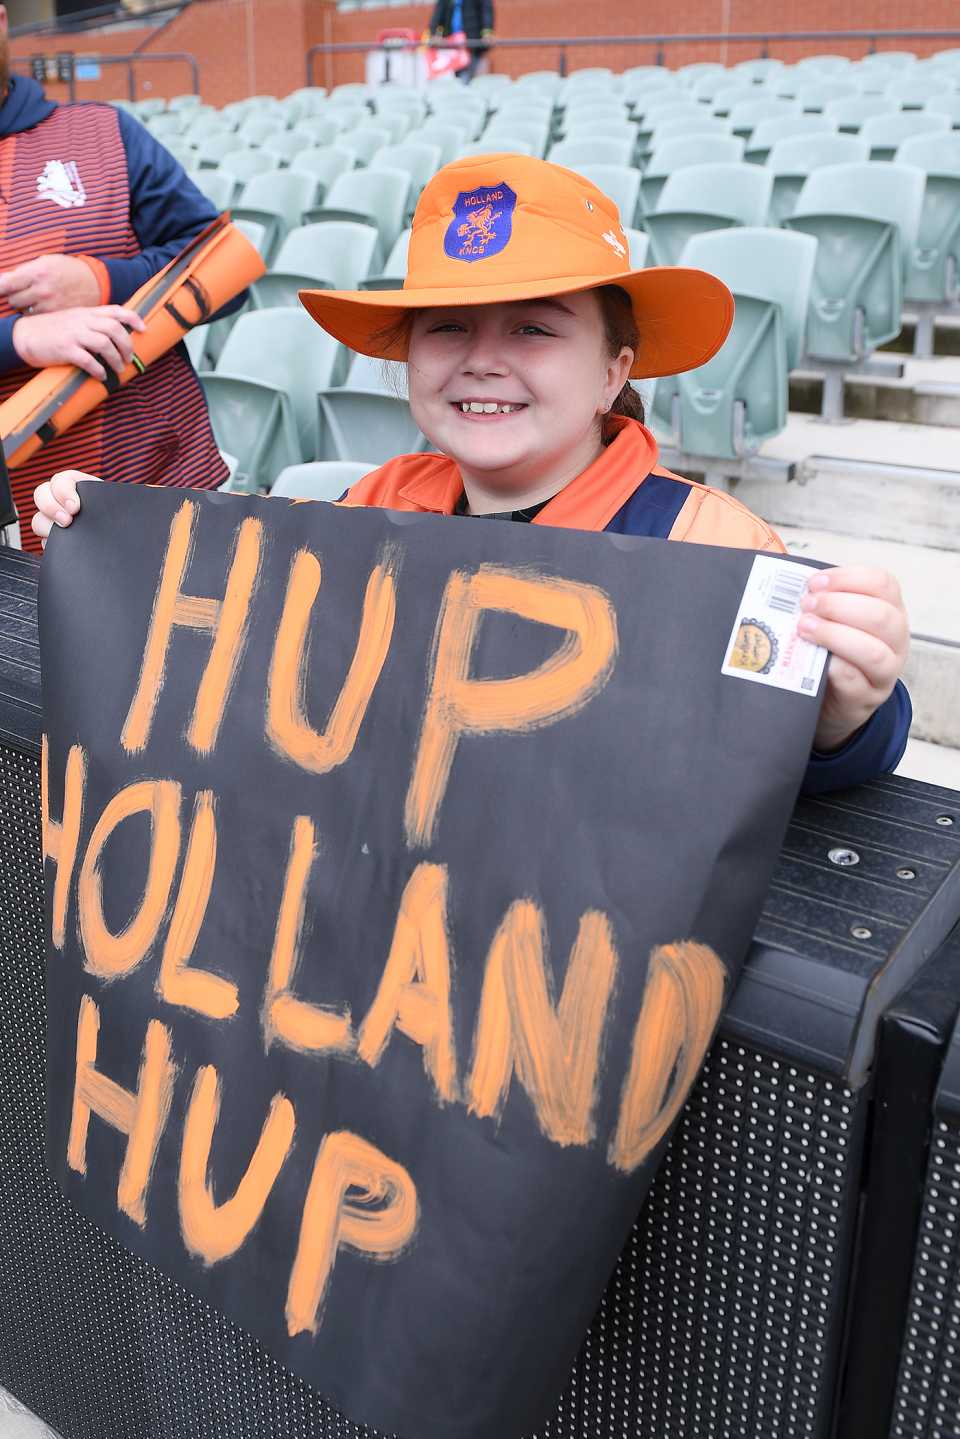 A Netherlands fan holds up a poster to show their support